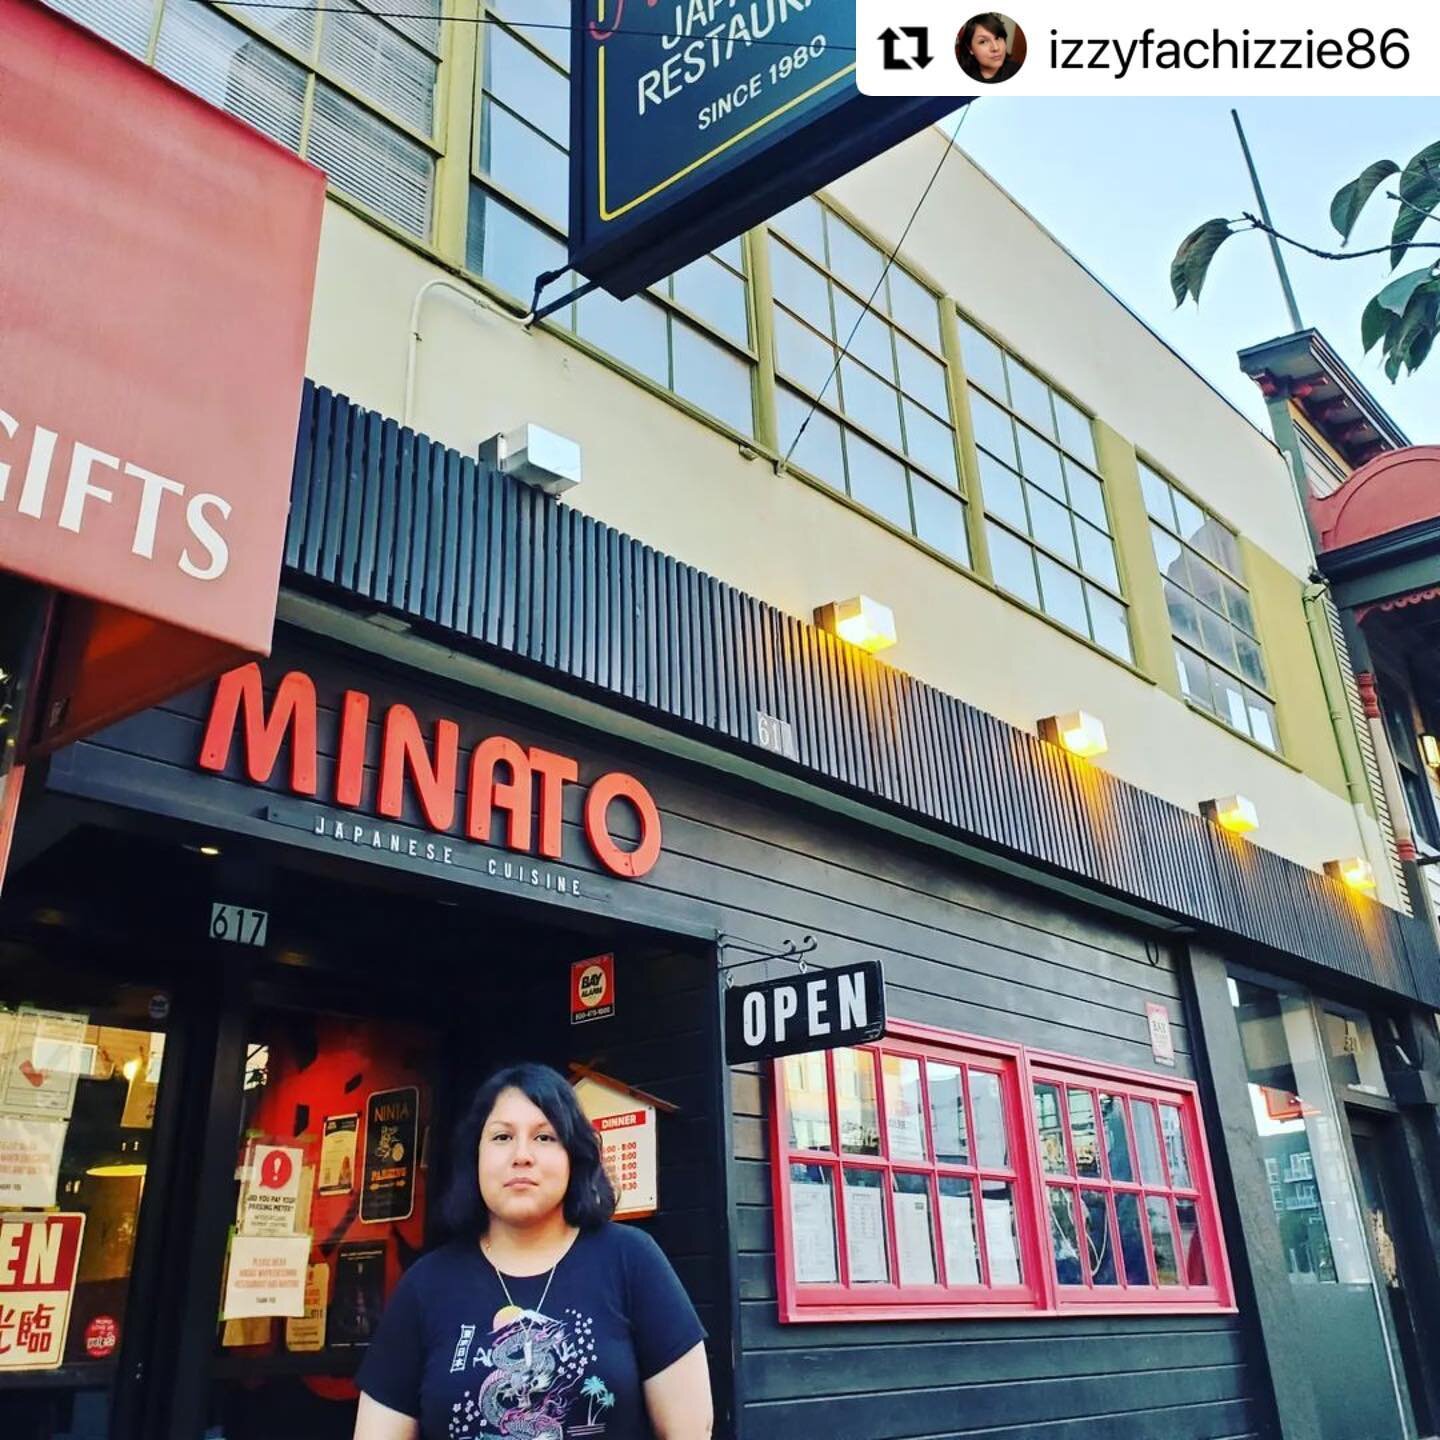 We &hearts;️ Minato, too! Thanks for visiting, Isabel!  #Repost @izzyfachizzie86 
・・・
Got off the plane and went straight to Japantown in San Jose to eat @minato_restaurant the food is so delicious. Definitely recommend 👌. Thanks to my sister and br